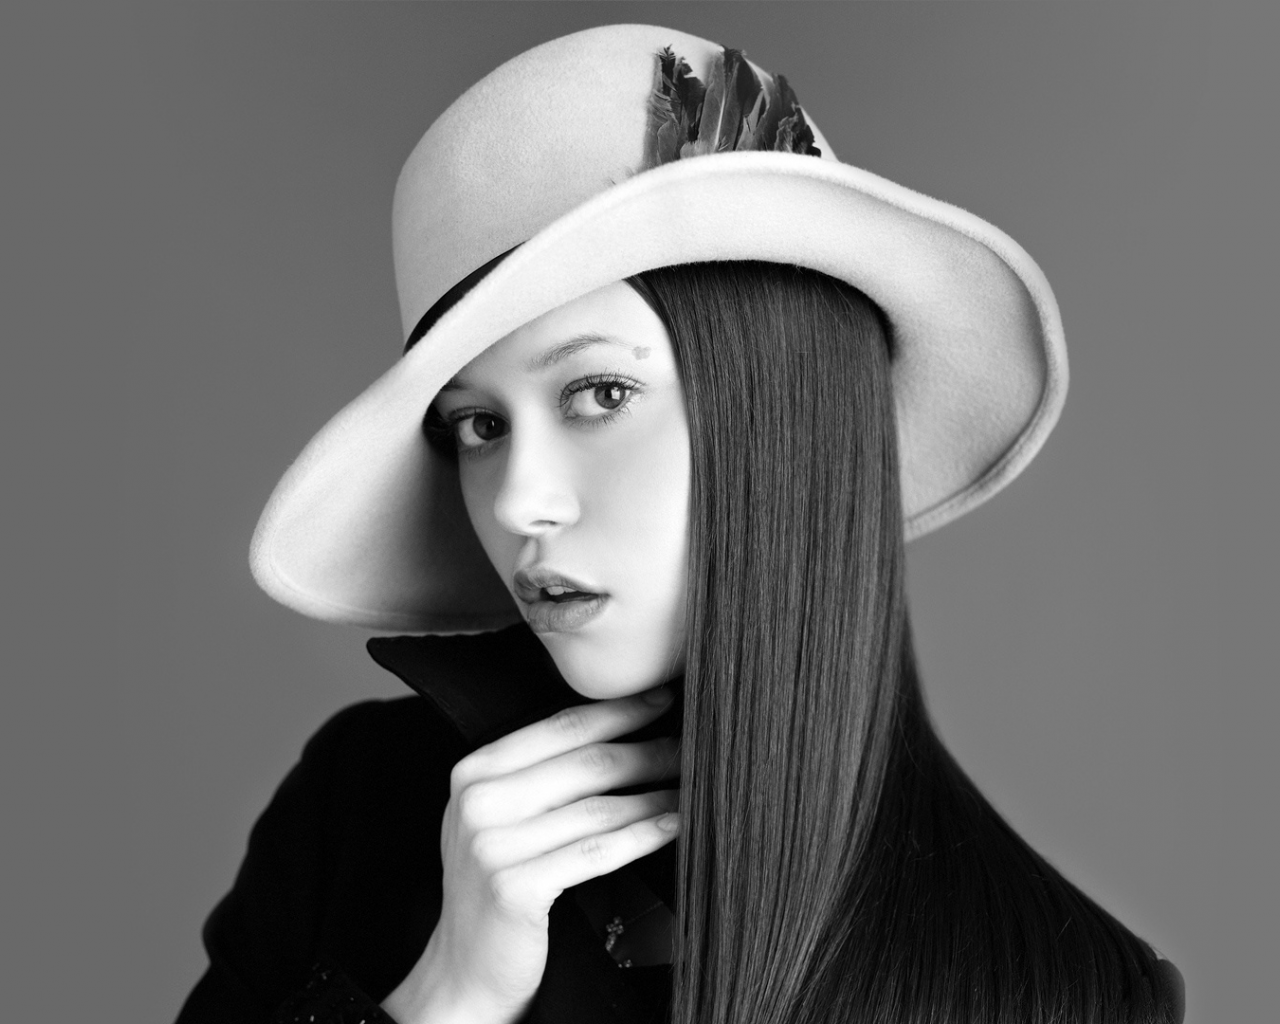 hat, саммер глау, summer glau, black and white, actress